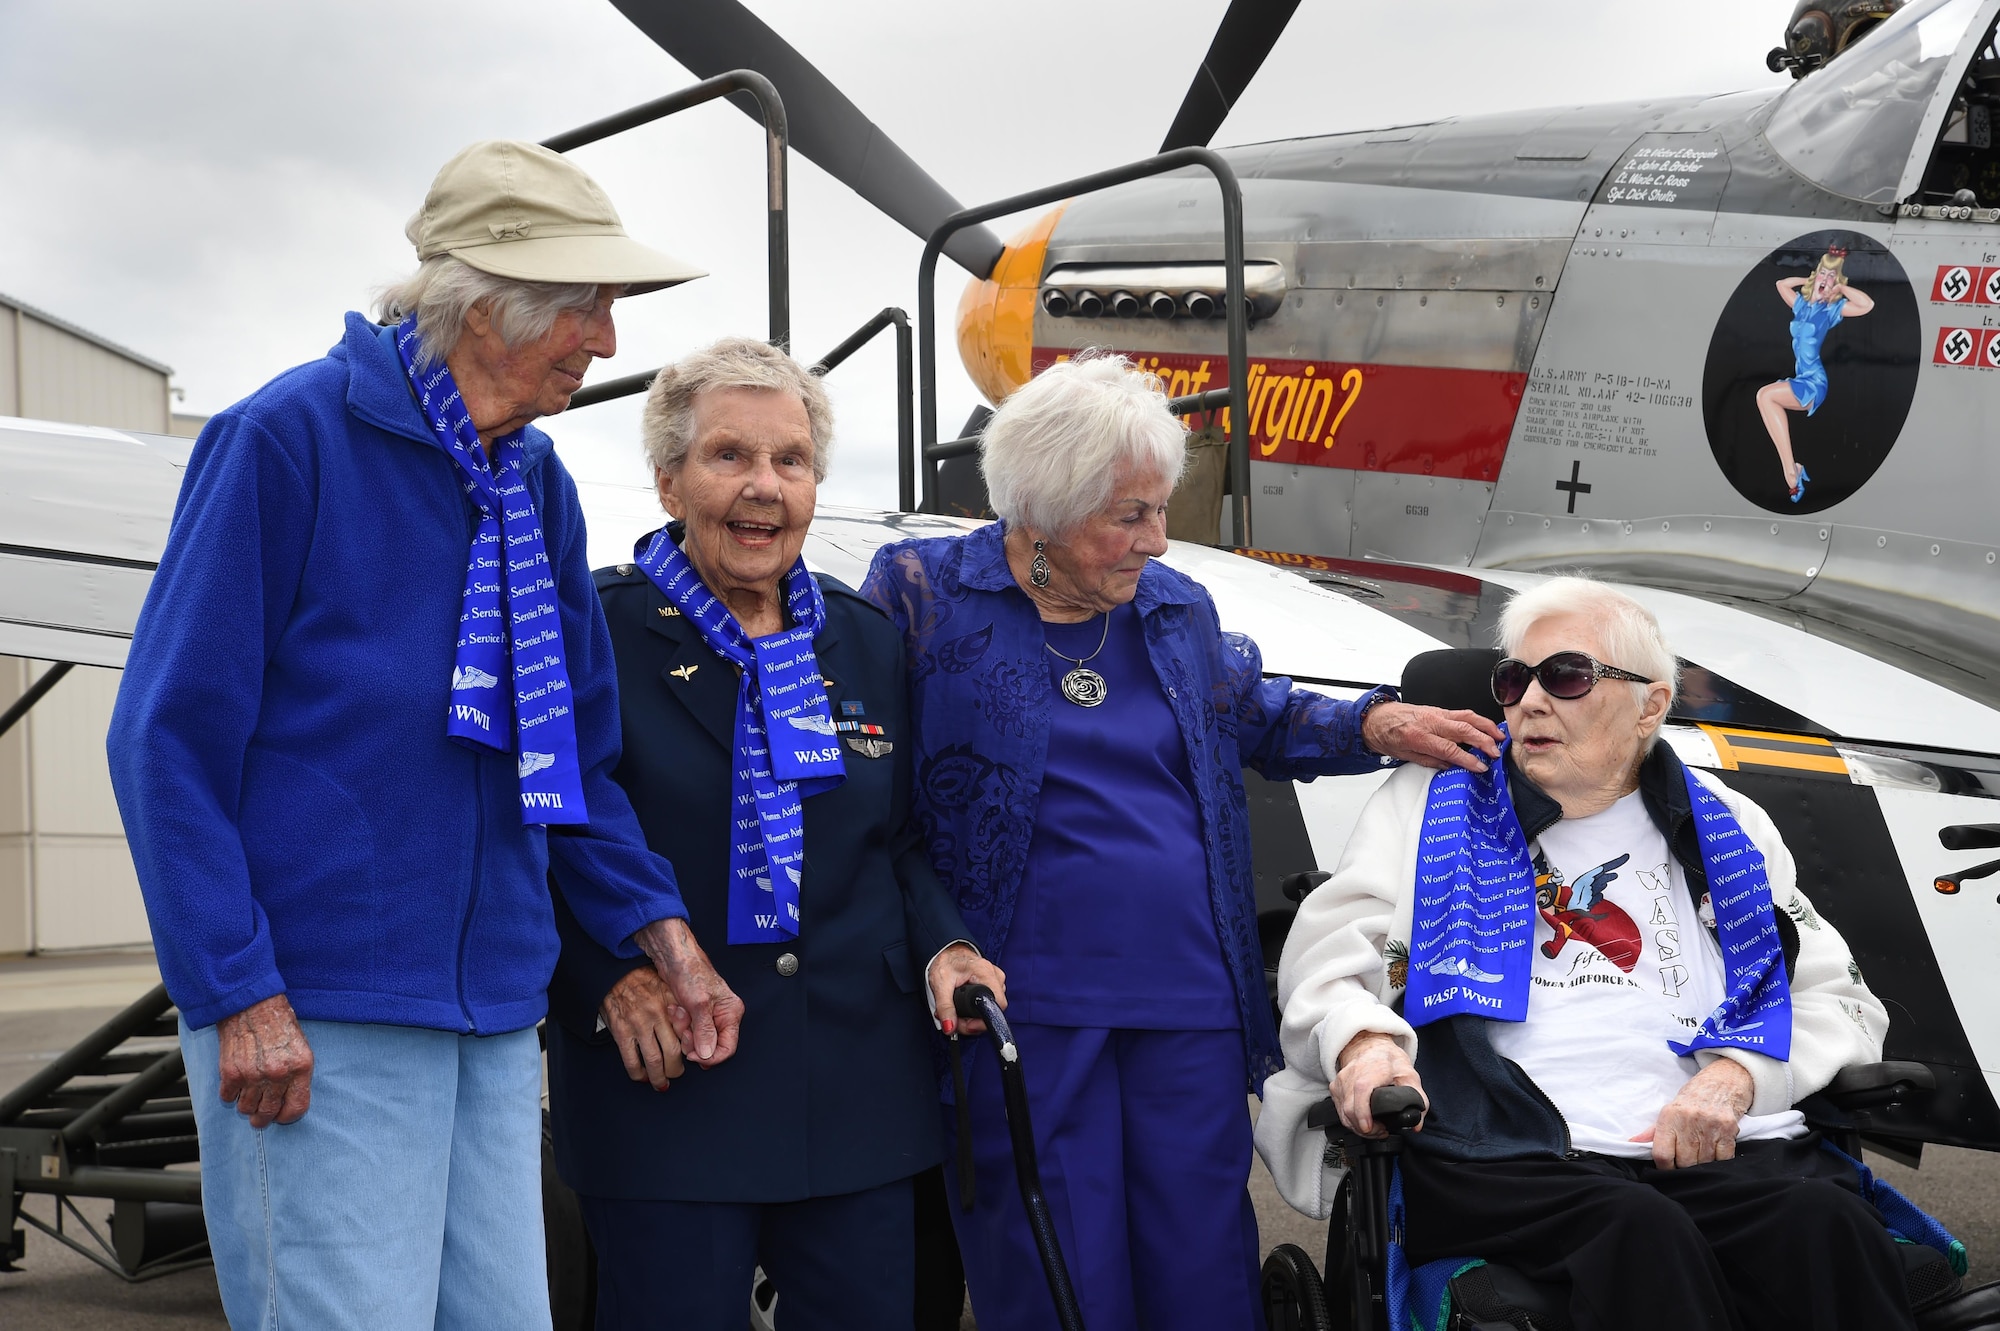 (From Left) Alta Thomas, Dorothy Olsen, Betty Dybbro and Mary Jean Sturdevant, former Women Airforce Service Pilots, stand in front of a P-51 Mustang on the McChord Field flight line July 10, 2016, at Joint Base Lewis-McChord, Wash. Olsen celebrated her 100th birthday at McChord along with three fellow WASP’s and their families at McChord. During World War II, Olsen flew fighter aircraft, her favorite being the P-51 Mustang, across the country to contribute to the war effort at home while male pilots were overseas fighting. (Air Force Photo/Staff Sgt. Naomi Shipley)